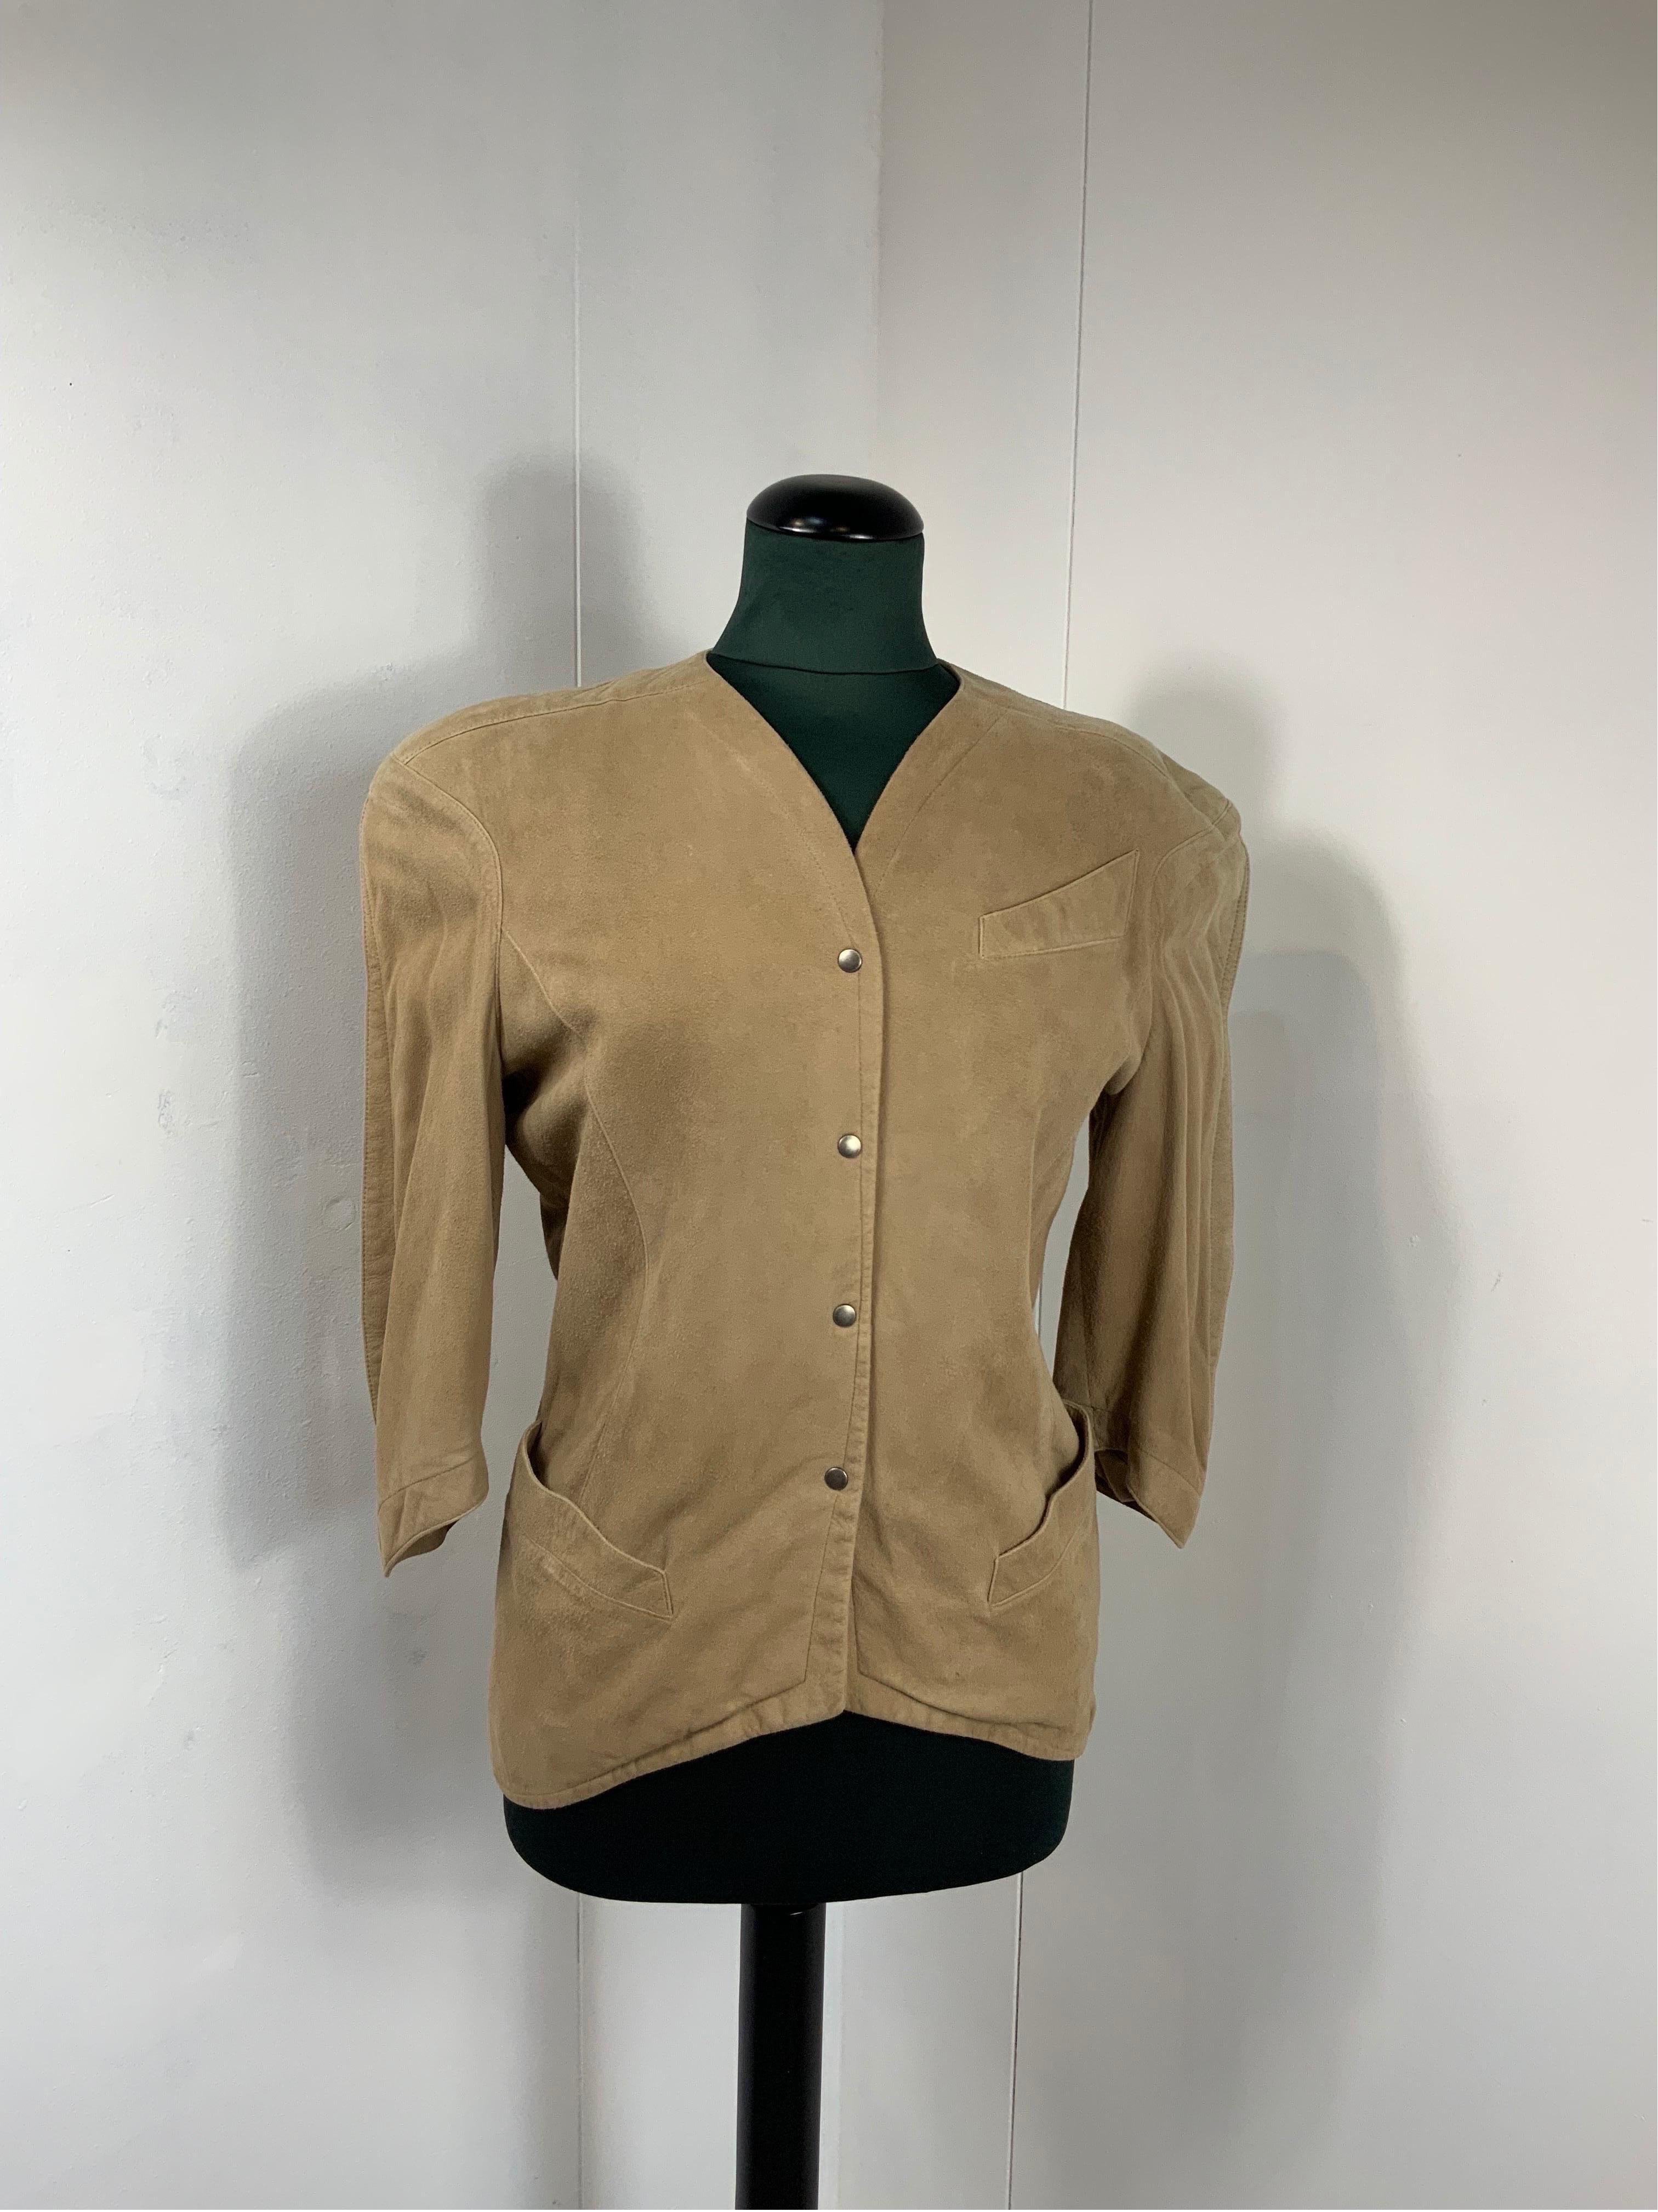 Thierry Mugler Jacket.
Vintage item.
Featuring suede leather and padded shoulders.
Size 38 FR.
Shoulders 46 cm
Bust 46 cm
Length 62 cm
Sleeves 45 cm
Conditions: Good - Previously owned and gently worn, with little signs of use. It show slight